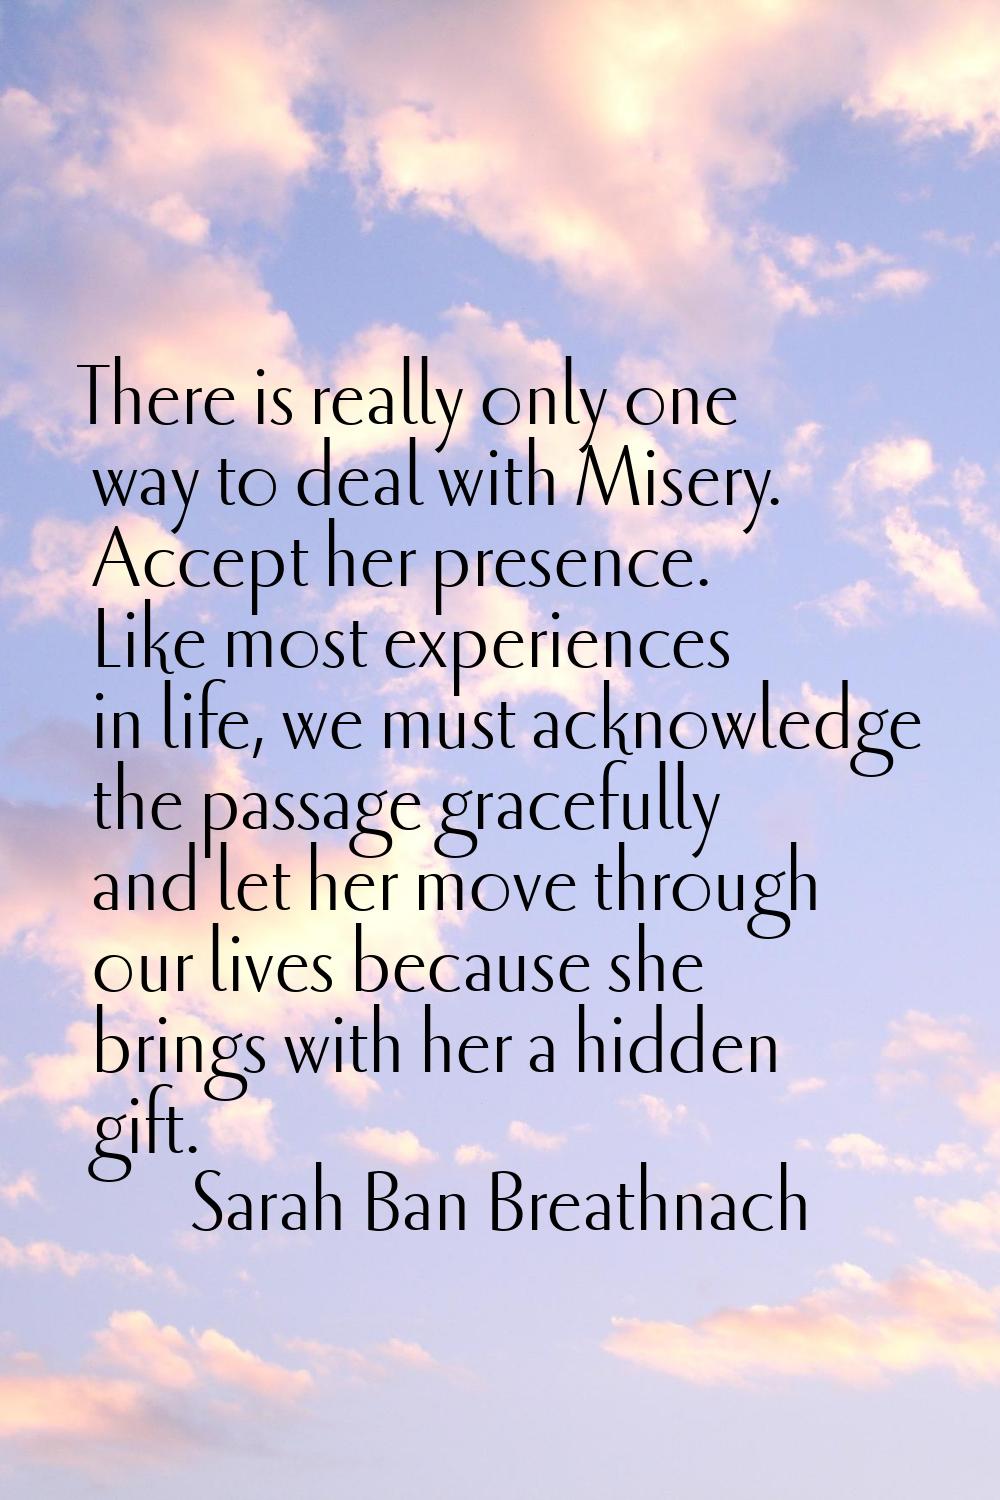 There is really only one way to deal with Misery. Accept her presence. Like most experiences in lif